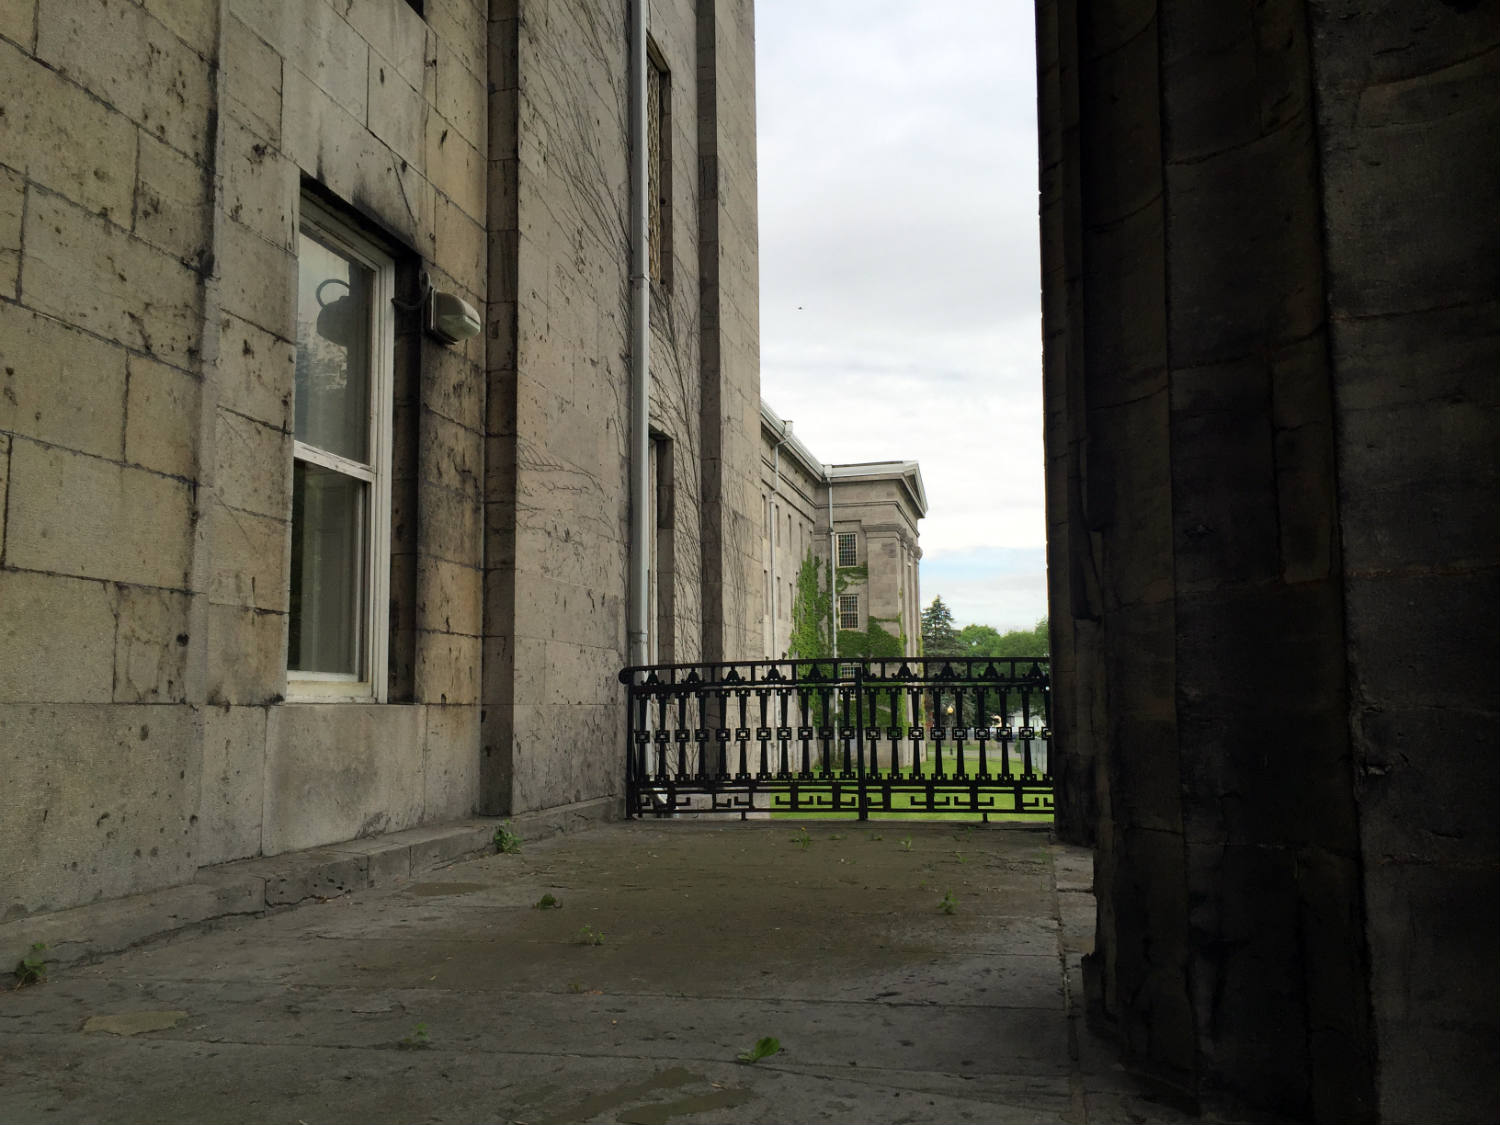 Portico View at the New York State Asylum at Utica in New York